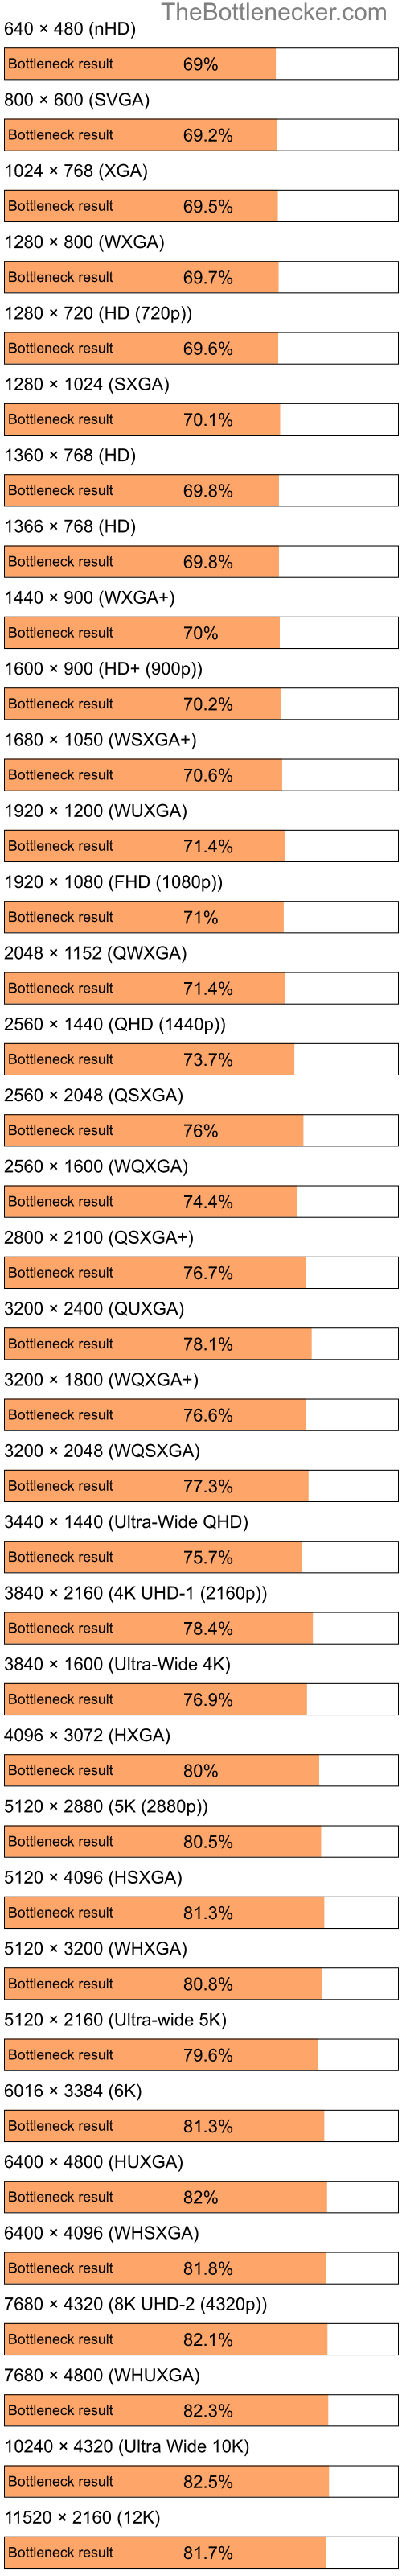 Bottleneck results by resolution for Intel Atom N270 and AMD Radeon 3100 in7 Days to Die